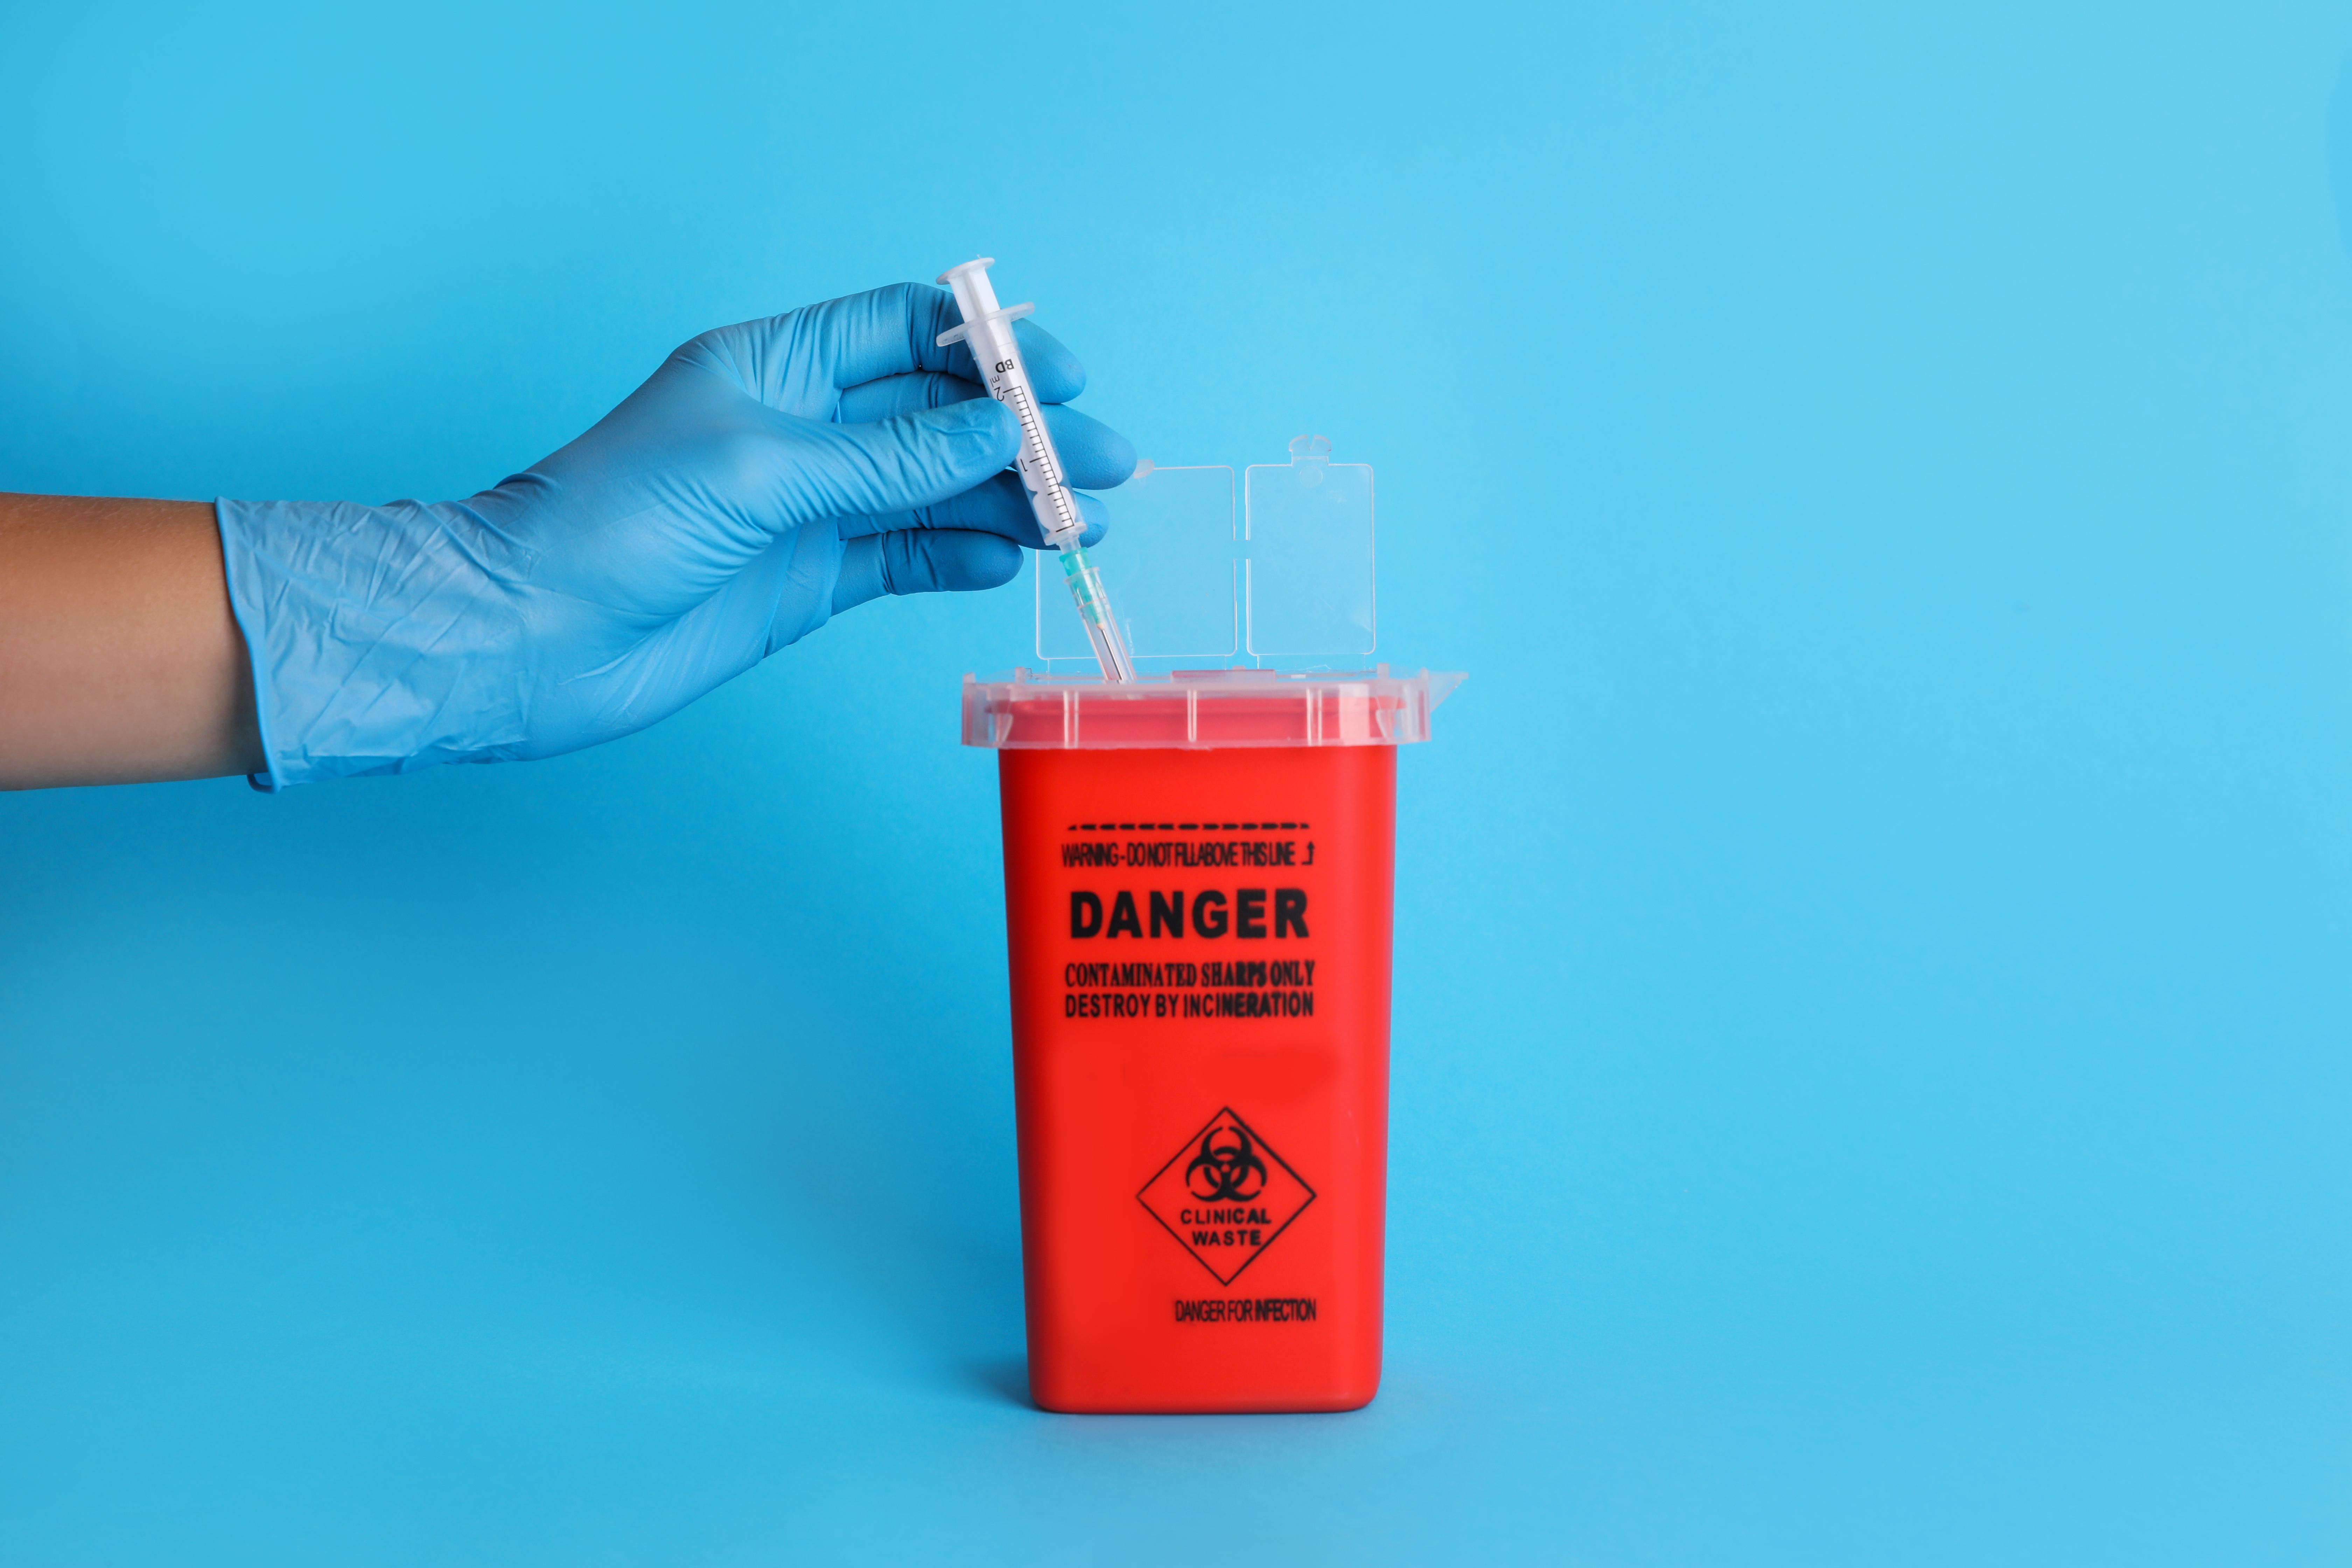 sharps container disposal